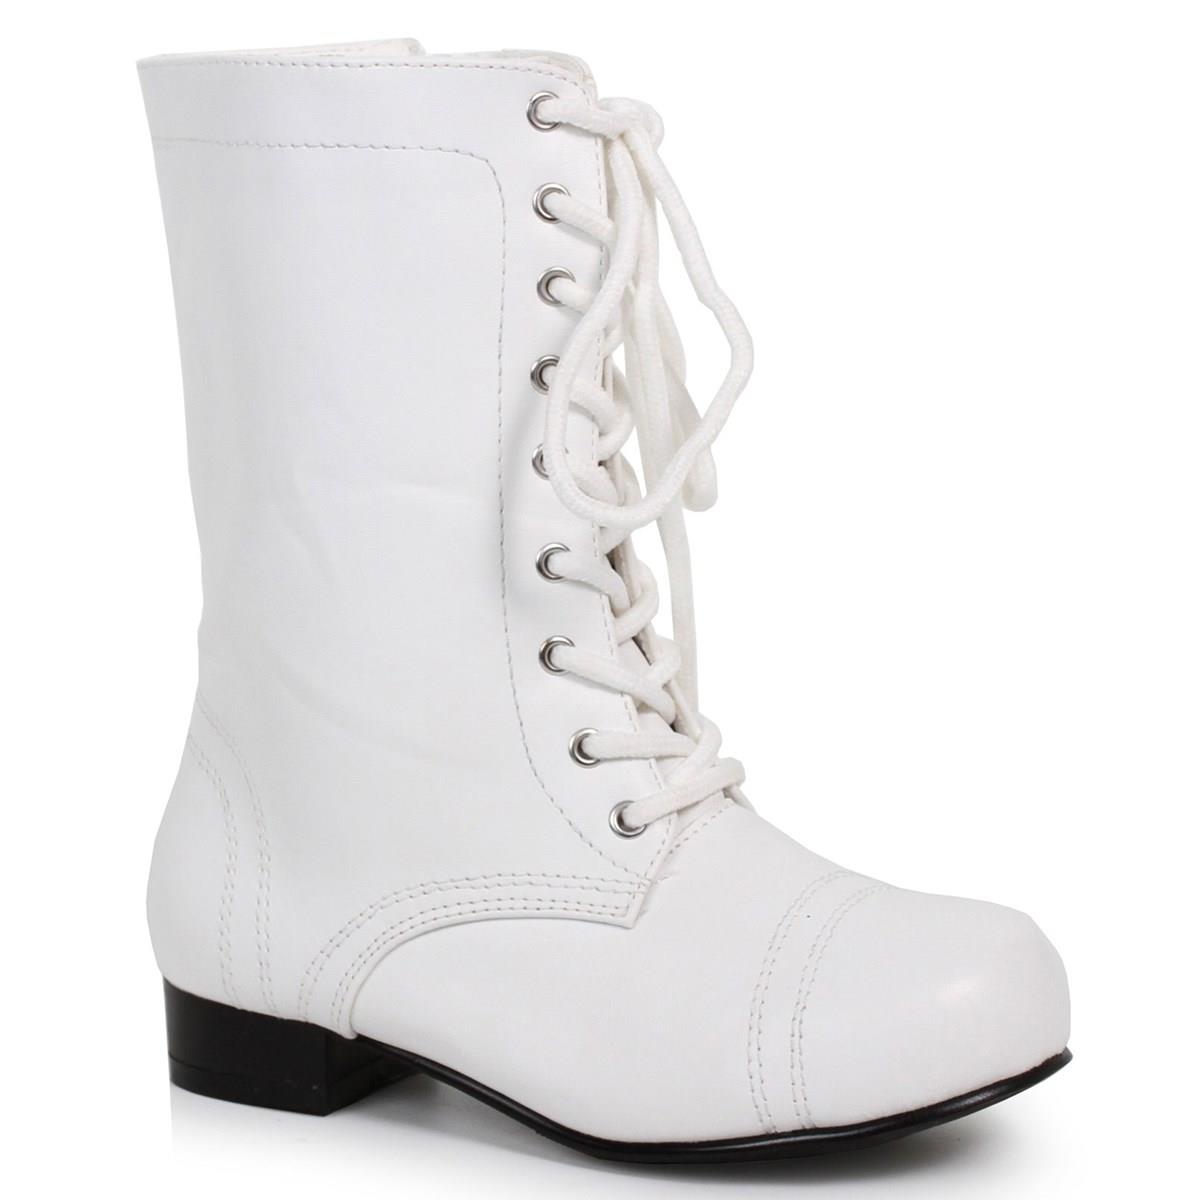 248629 Childrens Ankle Combat Boot, White - Small